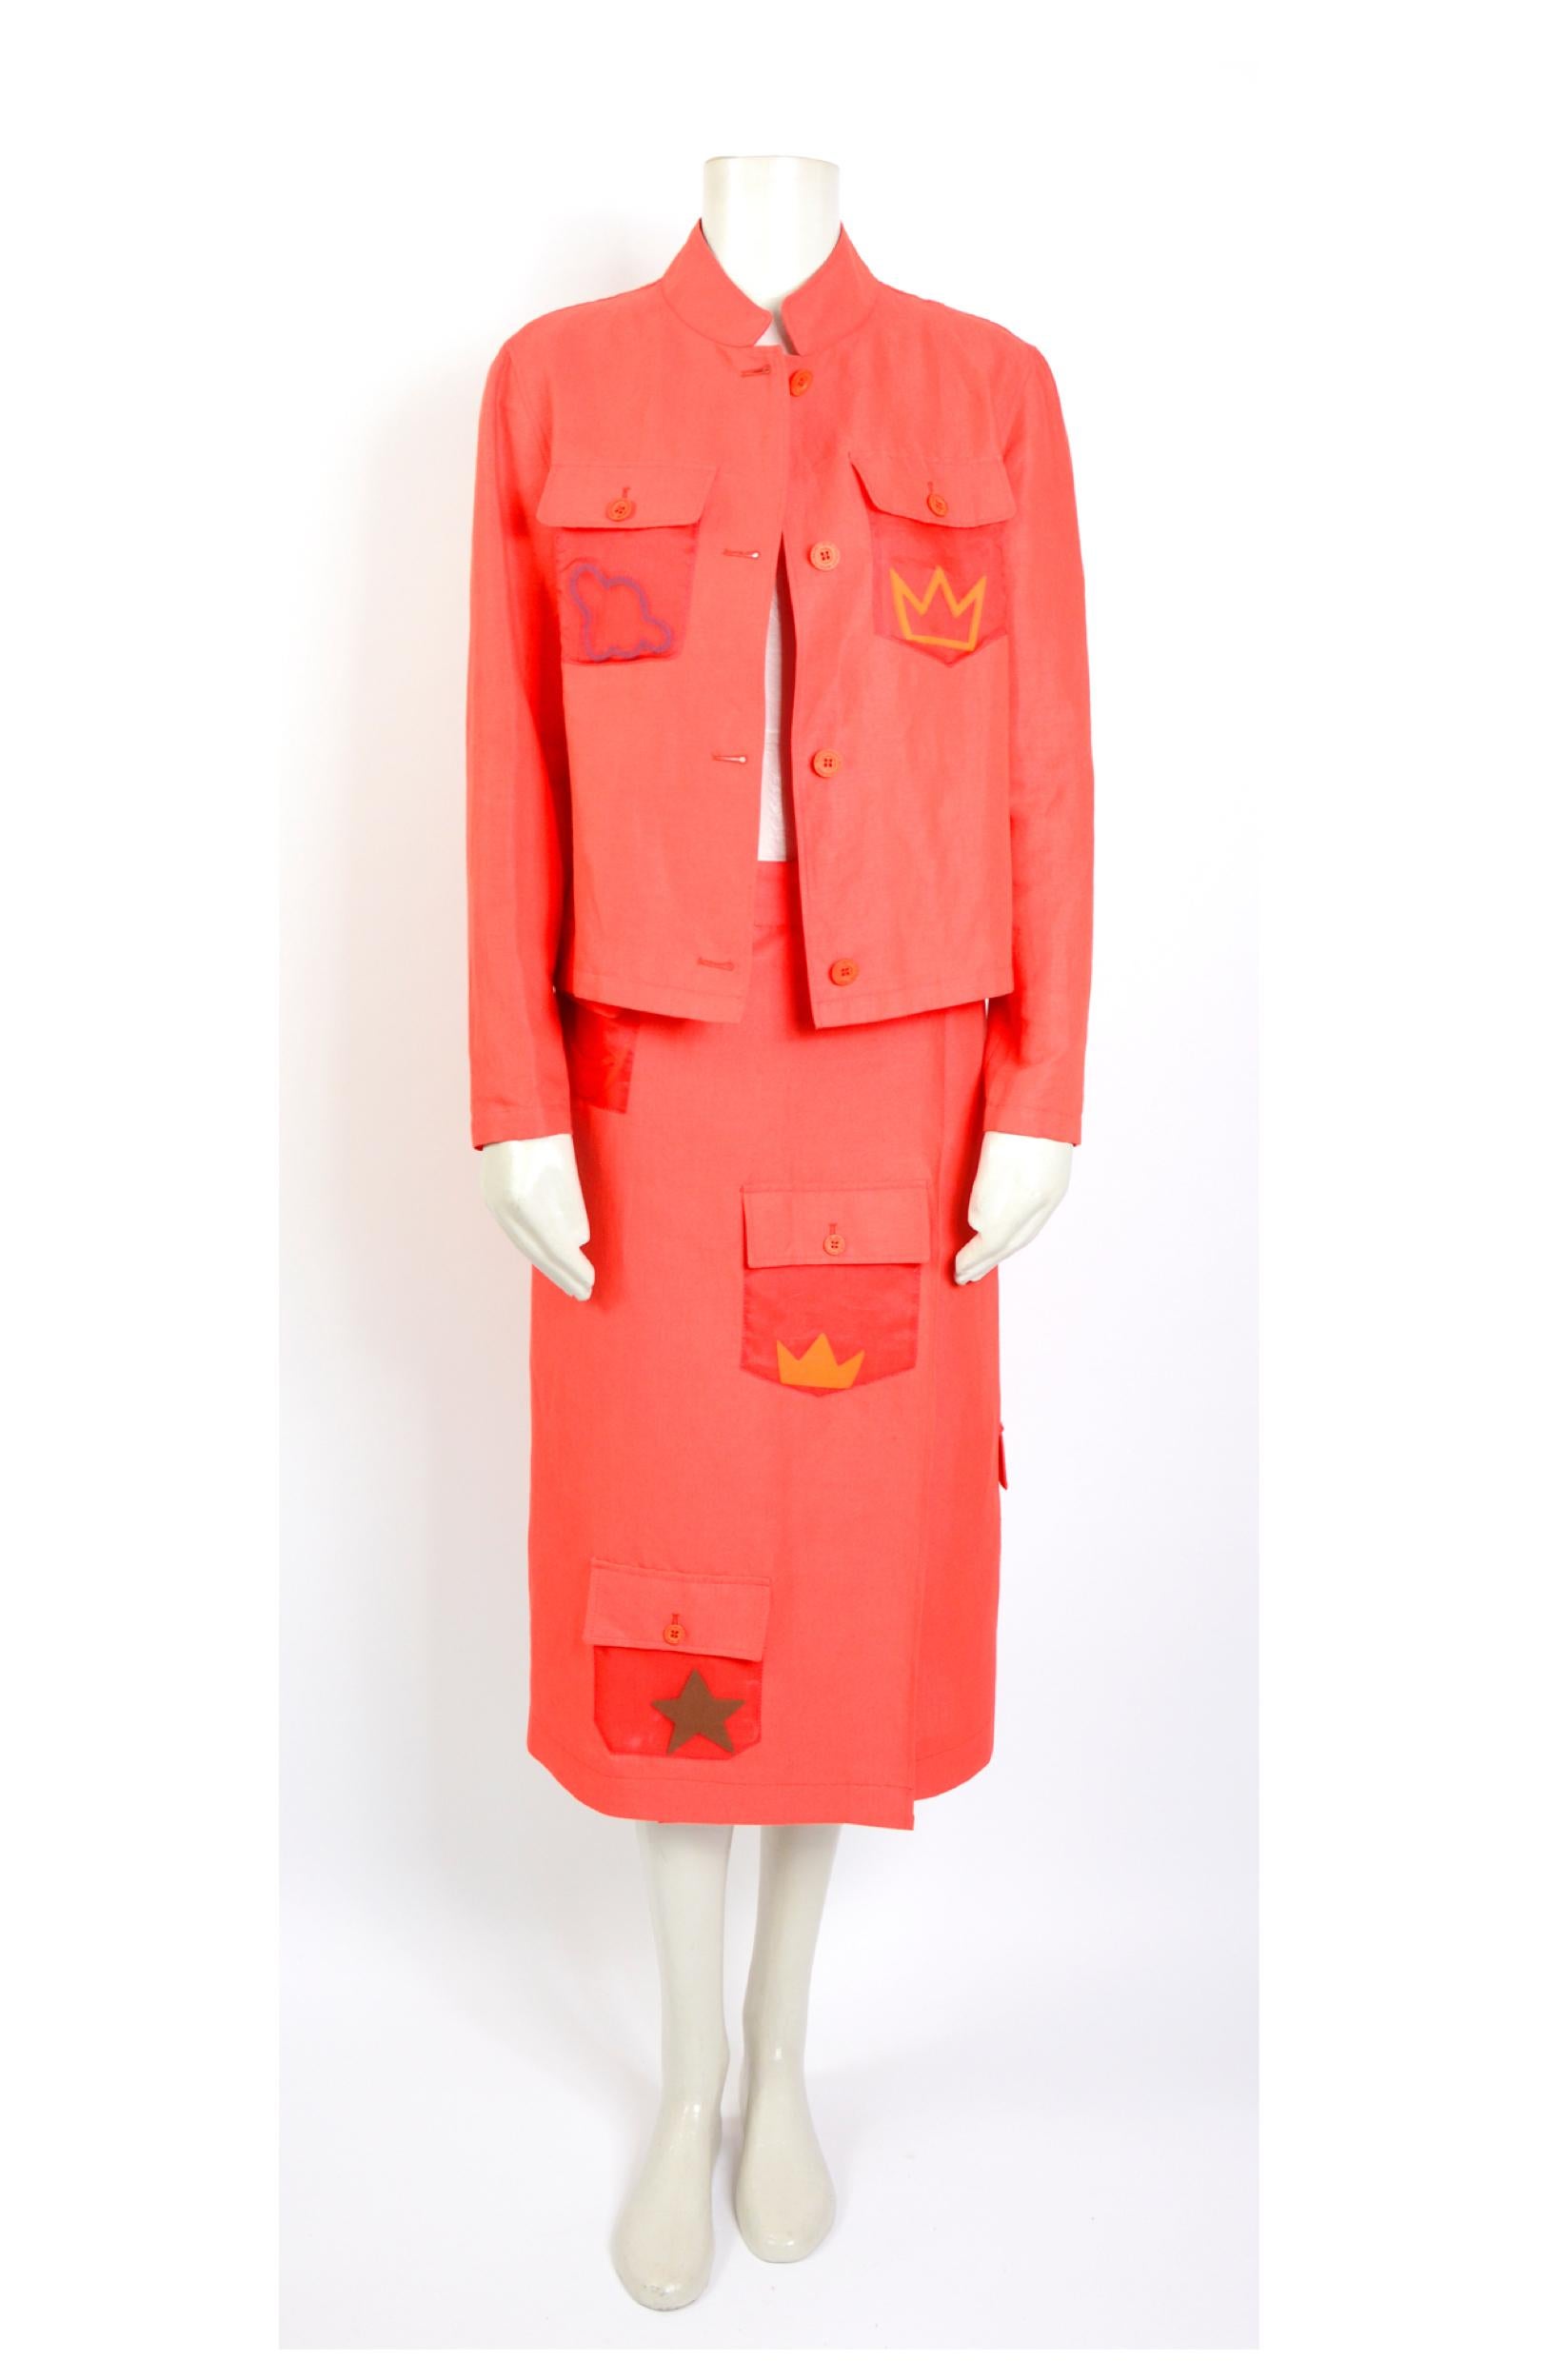 Jean Charles de Castelbajac vintage 1980s coral linen jacket and wrap skirt set.
Made in Italy size 42
Measurements that are taken flat:
Jacket: Ua to Ua 19,5inch/49,5cm(x2) - Waist 19inch/48cm(x2) - Sleeve 22inch/56cm - Total Length 21inch/53cm